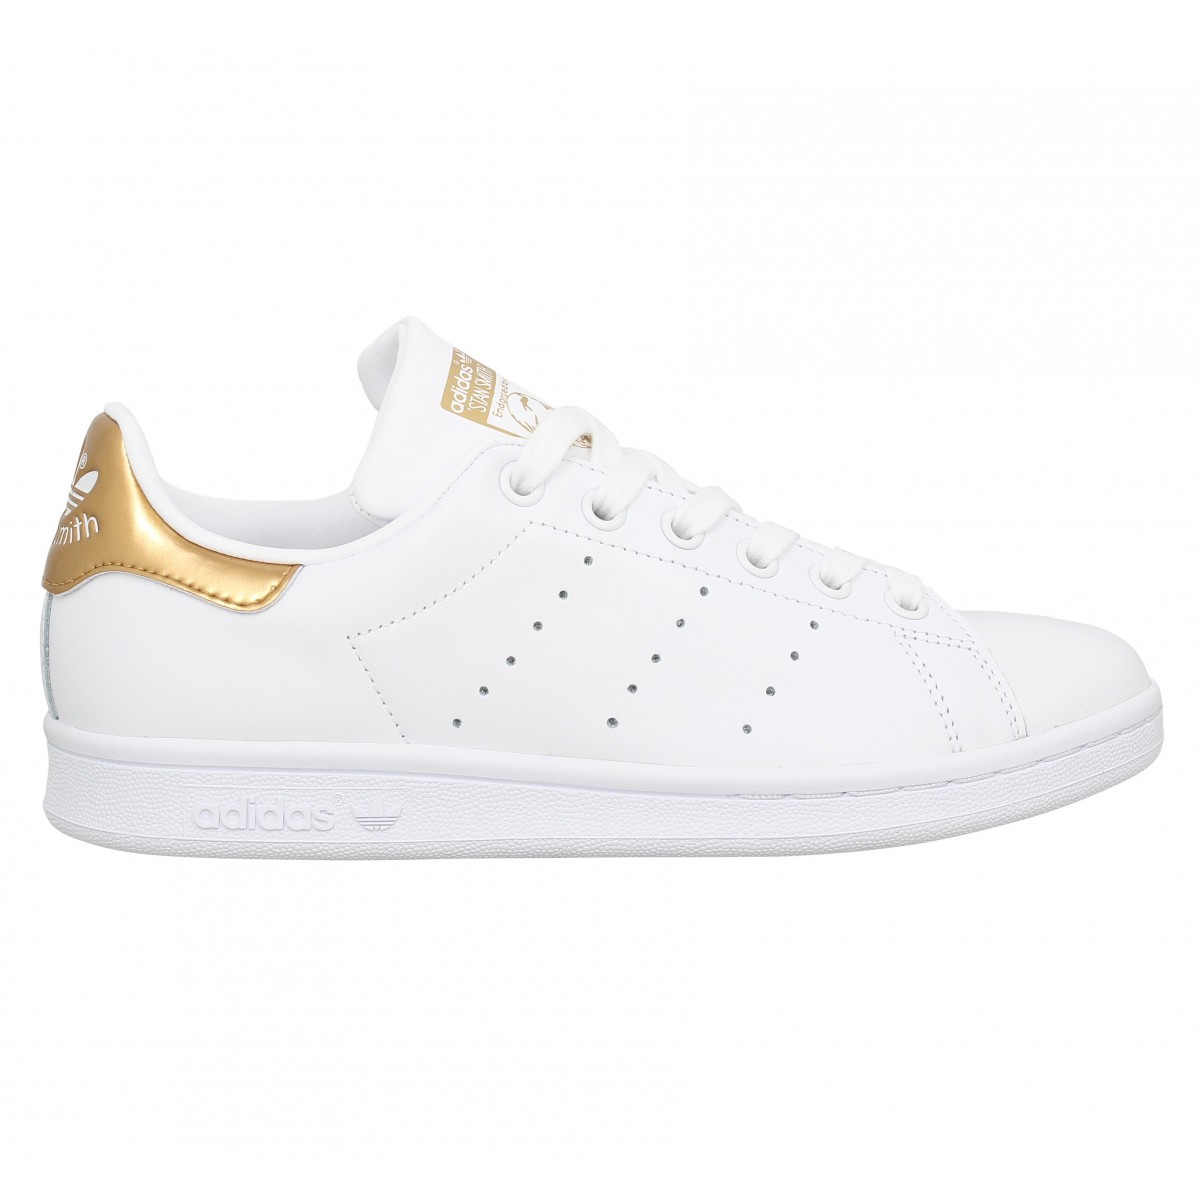 adidas stan smith femme blanche et or